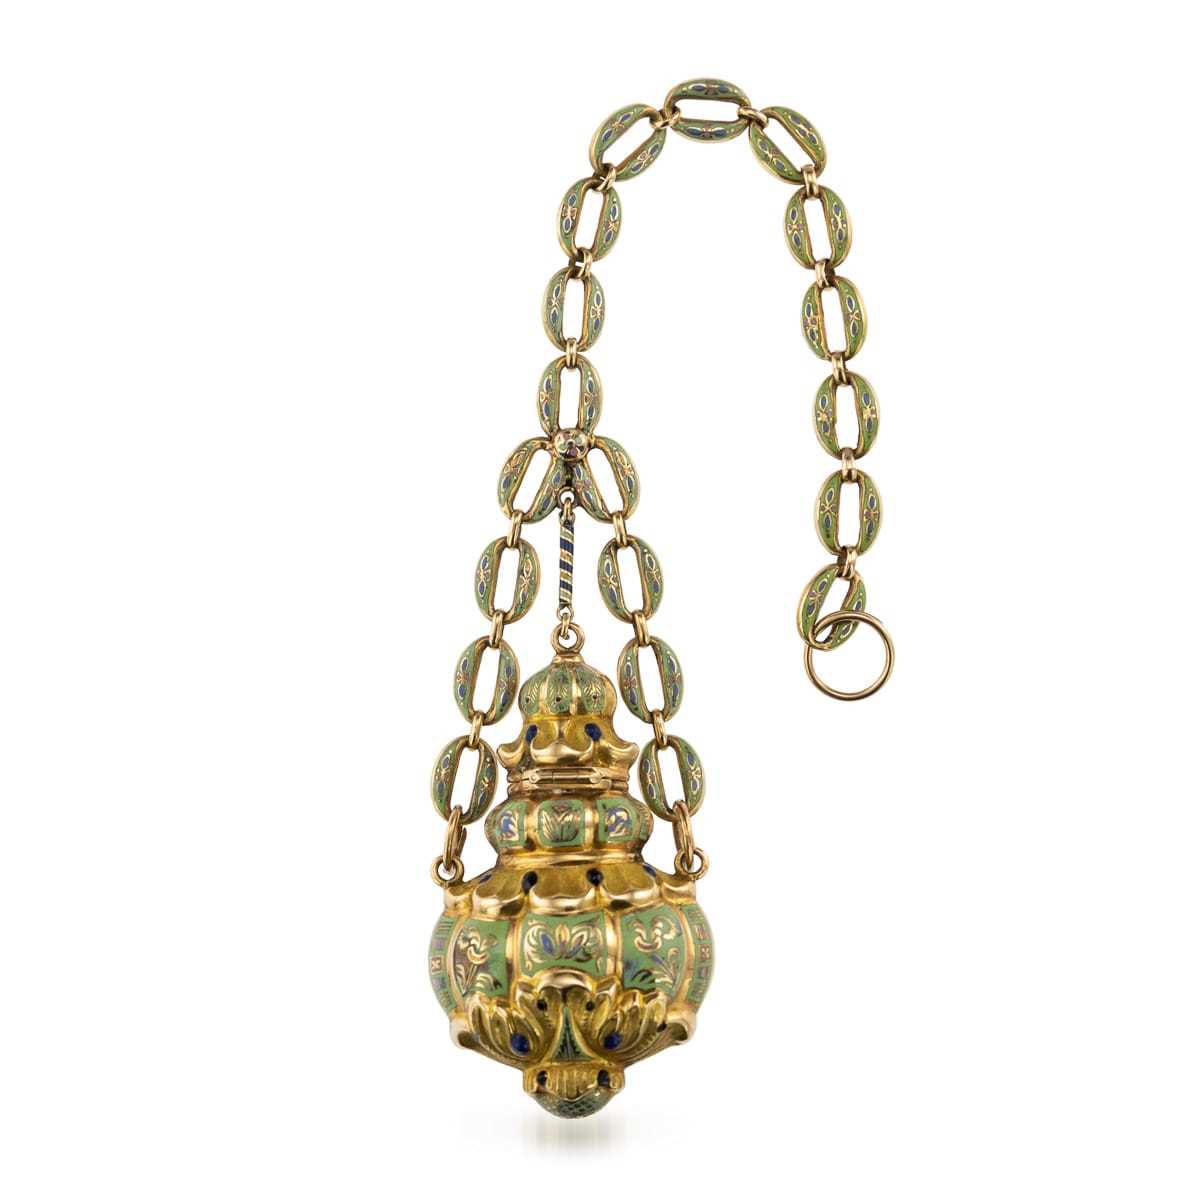 AN 18K GOLD AND ENAMEL SCENT BOTTLE, SWISS, EARLY 19TH CENTURY, FOR THE OTTOMAN MARKET - Image 5 of 12